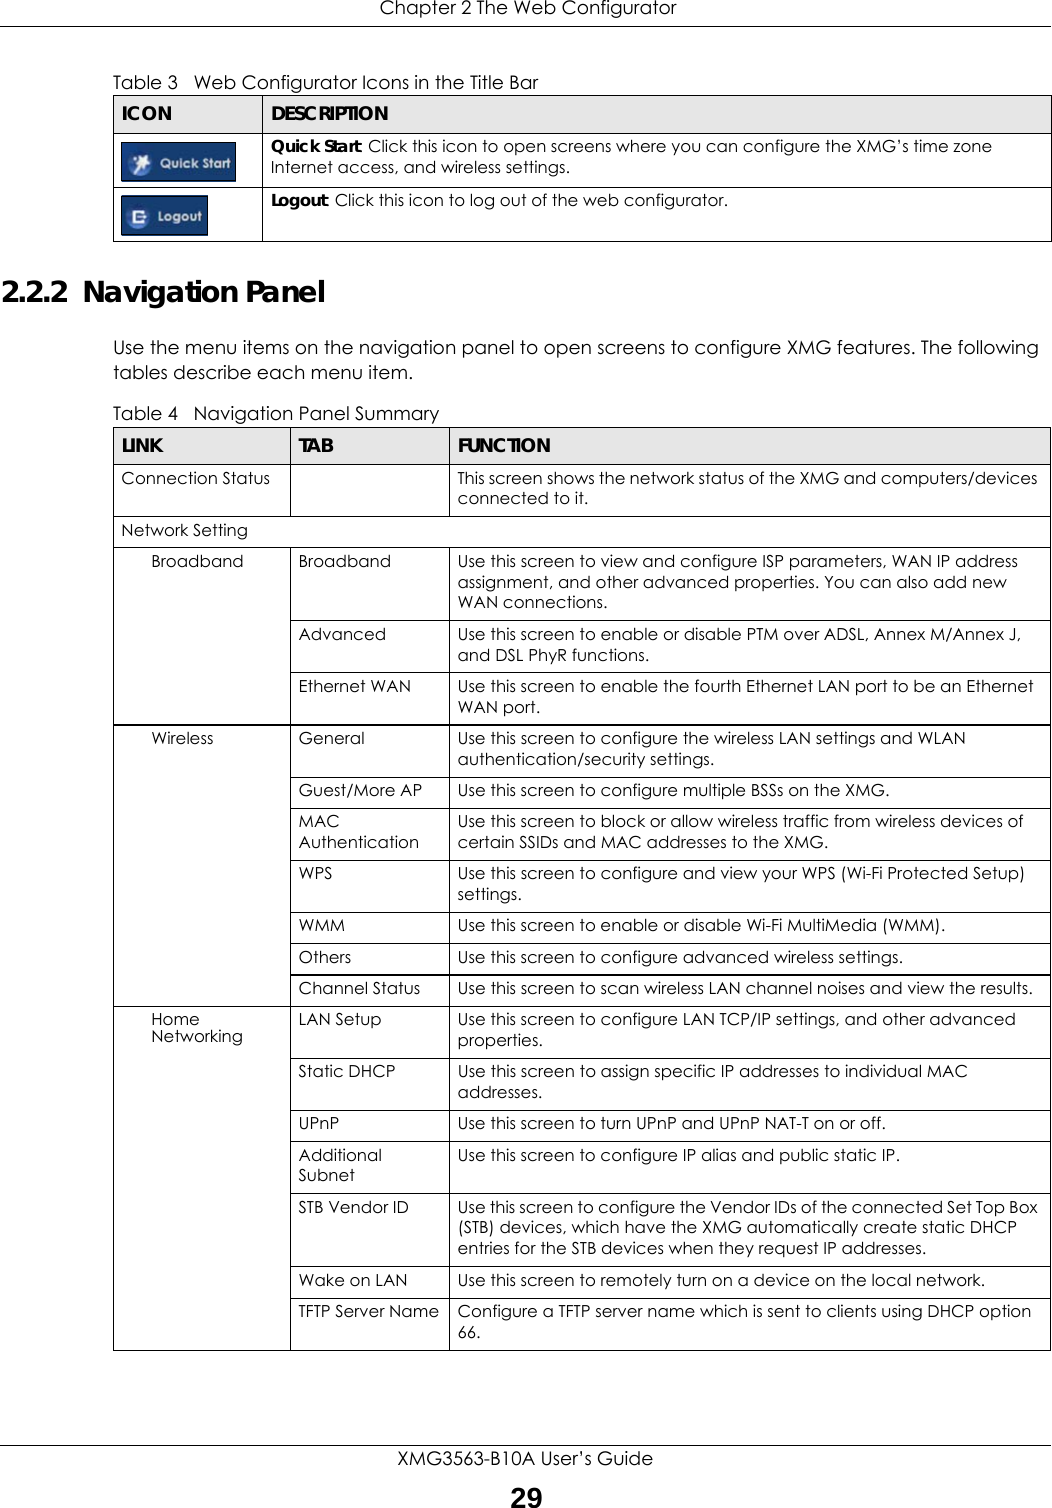  Chapter 2 The Web ConfiguratorXMG3563-B10A User’s Guide292.2.2  Navigation PanelUse the menu items on the navigation panel to open screens to configure XMG features. The following tables describe each menu item. Quick Start: Click this icon to open screens where you can configure the XMG’s time zone Internet access, and wireless settings.Logout: Click this icon to log out of the web configurator.Table 3   Web Configurator Icons in the Title BarICON  DESCRIPTIONTable 4   Navigation Panel SummaryLINK TAB FUNCTIONConnection Status This screen shows the network status of the XMG and computers/devices connected to it.Network SettingBroadband Broadband Use this screen to view and configure ISP parameters, WAN IP address assignment, and other advanced properties. You can also add new WAN connections.Advanced Use this screen to enable or disable PTM over ADSL, Annex M/Annex J, and DSL PhyR functions.Ethernet WAN Use this screen to enable the fourth Ethernet LAN port to be an Ethernet WAN port.Wireless General Use this screen to configure the wireless LAN settings and WLAN authentication/security settings. Guest/More AP Use this screen to configure multiple BSSs on the XMG.MAC AuthenticationUse this screen to block or allow wireless traffic from wireless devices of certain SSIDs and MAC addresses to the XMG.WPS Use this screen to configure and view your WPS (Wi-Fi Protected Setup) settings.WMM Use this screen to enable or disable Wi-Fi MultiMedia (WMM).Others Use this screen to configure advanced wireless settings.Channel Status Use this screen to scan wireless LAN channel noises and view the results.Home Networking LAN Setup Use this screen to configure LAN TCP/IP settings, and other advanced properties.Static DHCP  Use this screen to assign specific IP addresses to individual MAC addresses.UPnP Use this screen to turn UPnP and UPnP NAT-T on or off.Additional SubnetUse this screen to configure IP alias and public static IP.STB Vendor ID Use this screen to configure the Vendor IDs of the connected Set Top Box (STB) devices, which have the XMG automatically create static DHCP entries for the STB devices when they request IP addresses.Wake on LAN Use this screen to remotely turn on a device on the local network.TFTP Server Name Configure a TFTP server name which is sent to clients using DHCP option 66.